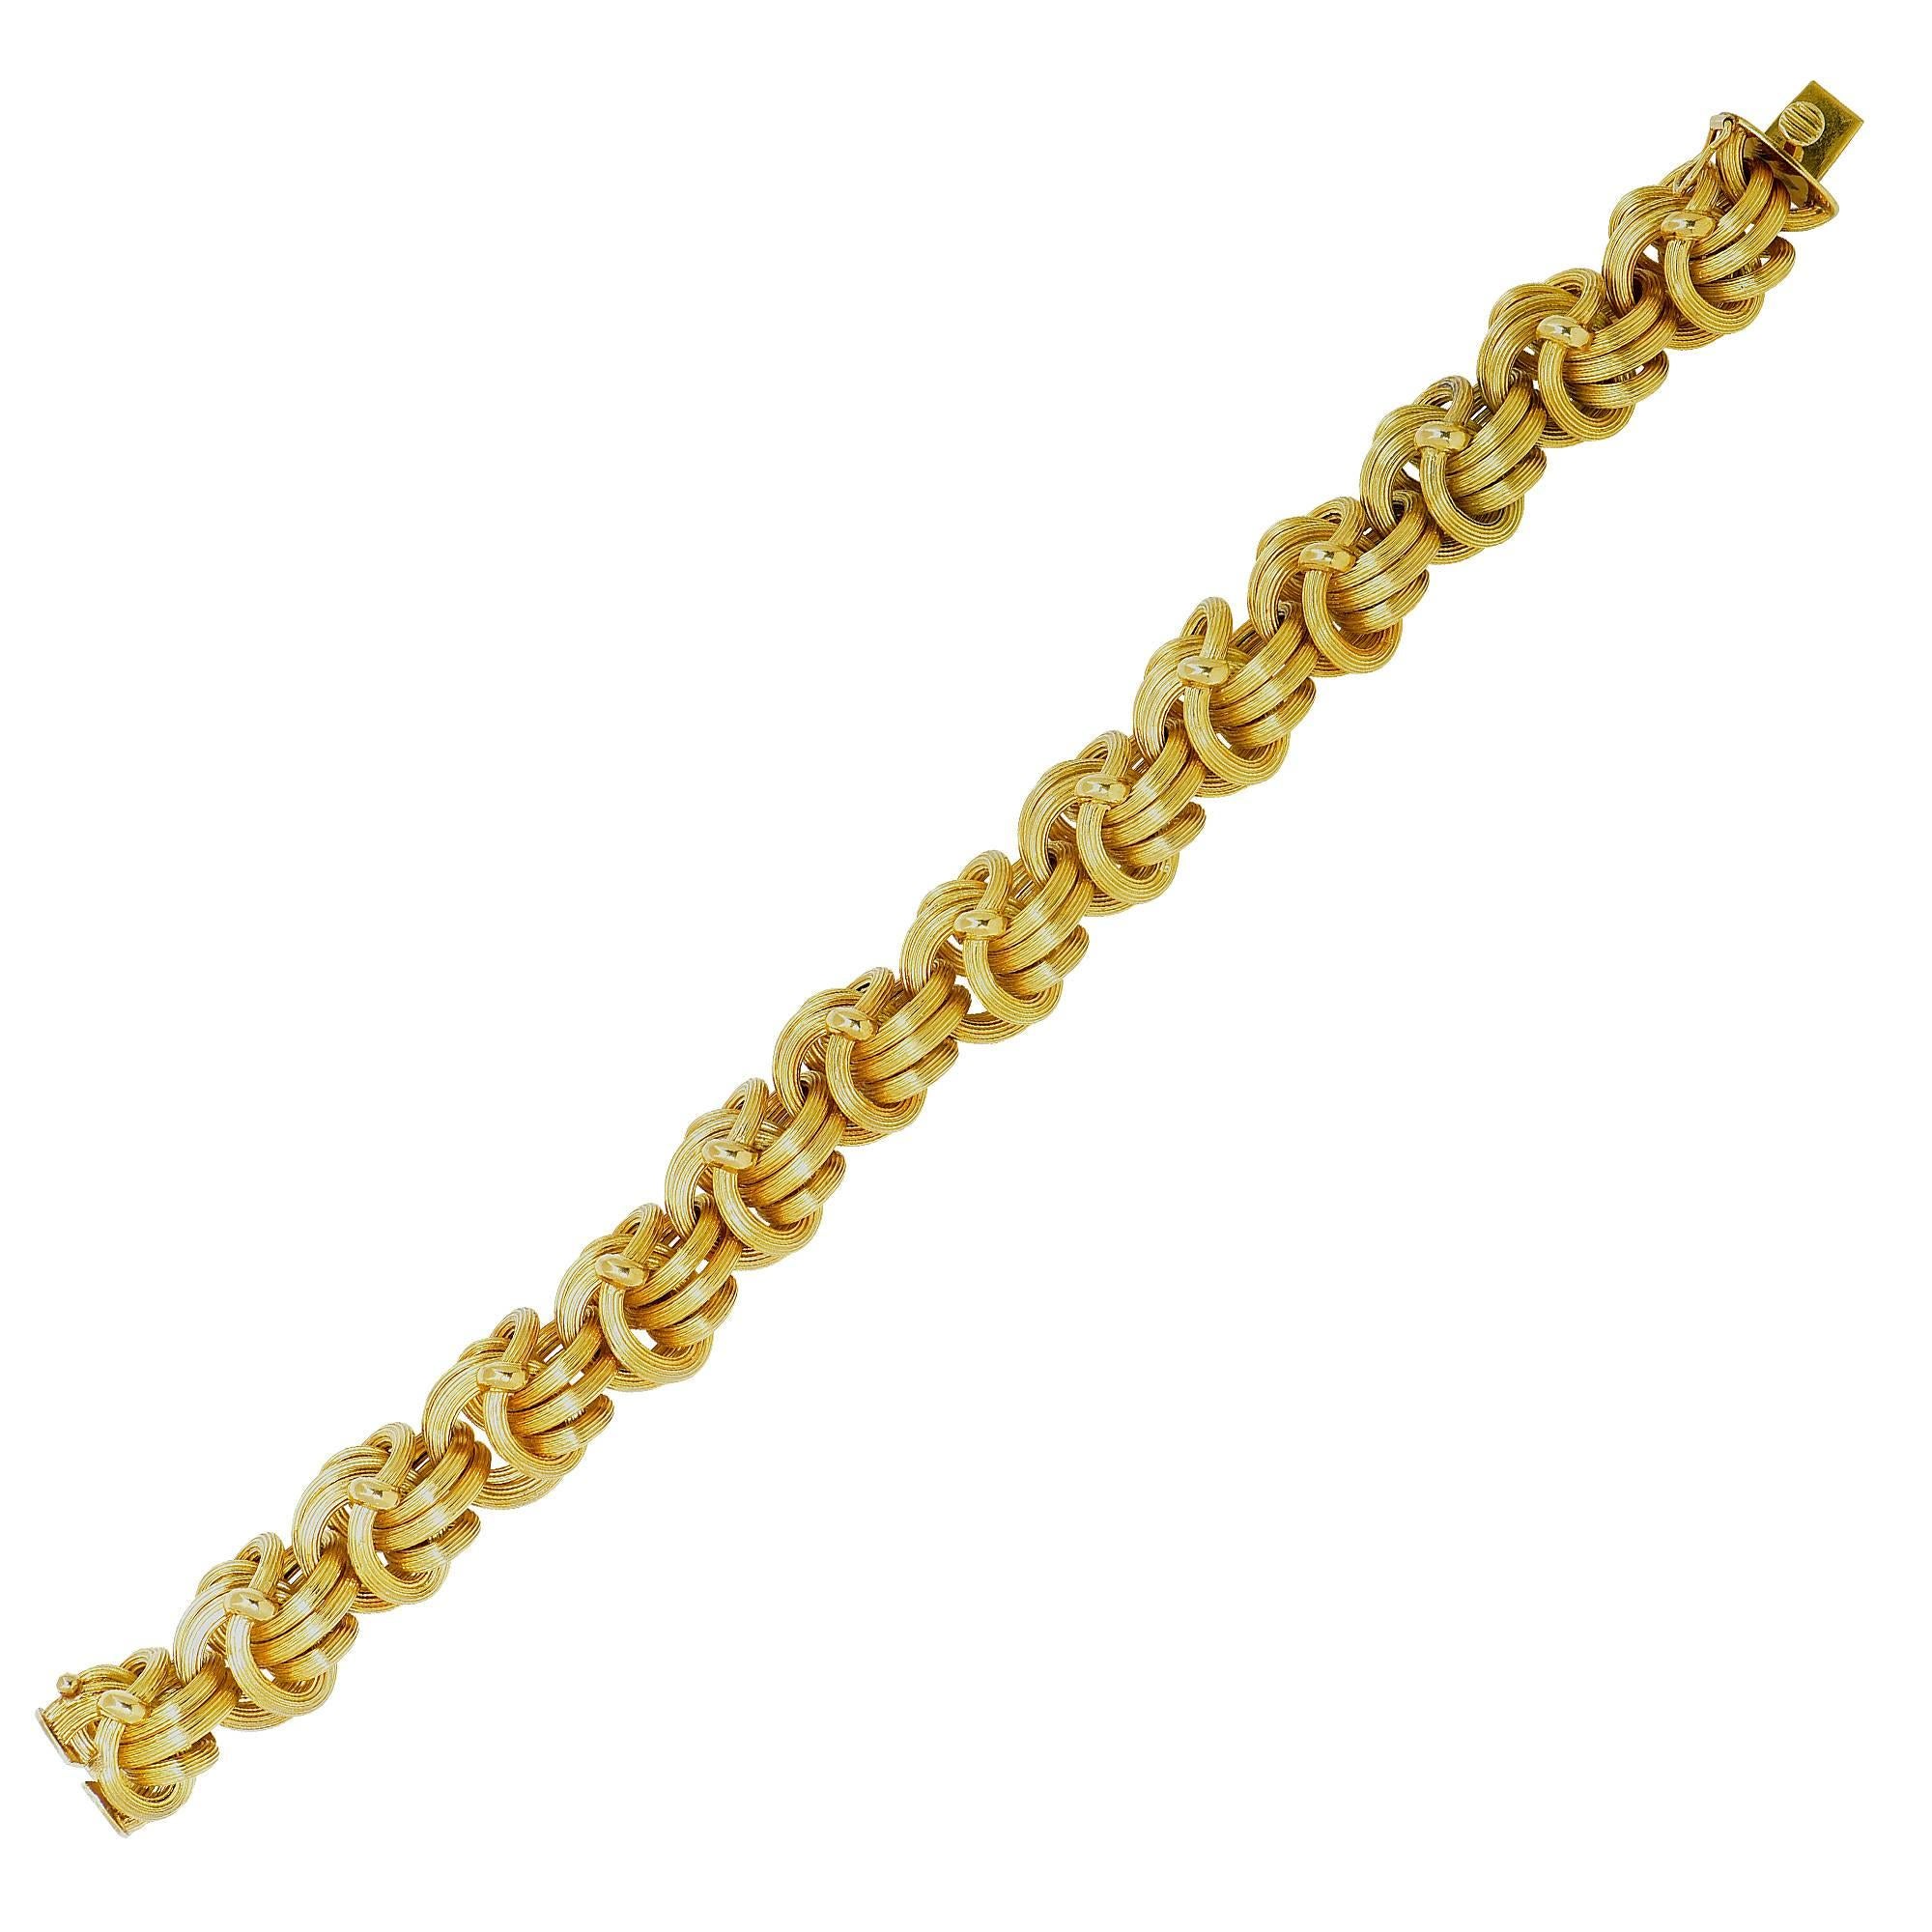 18k yellow gold wove bracelet, made in Italy.

Metal weight: 37.94 grams

This gold bracelet is accompanied by a retail appraisal performed by a GIA Graduate Gemologist.